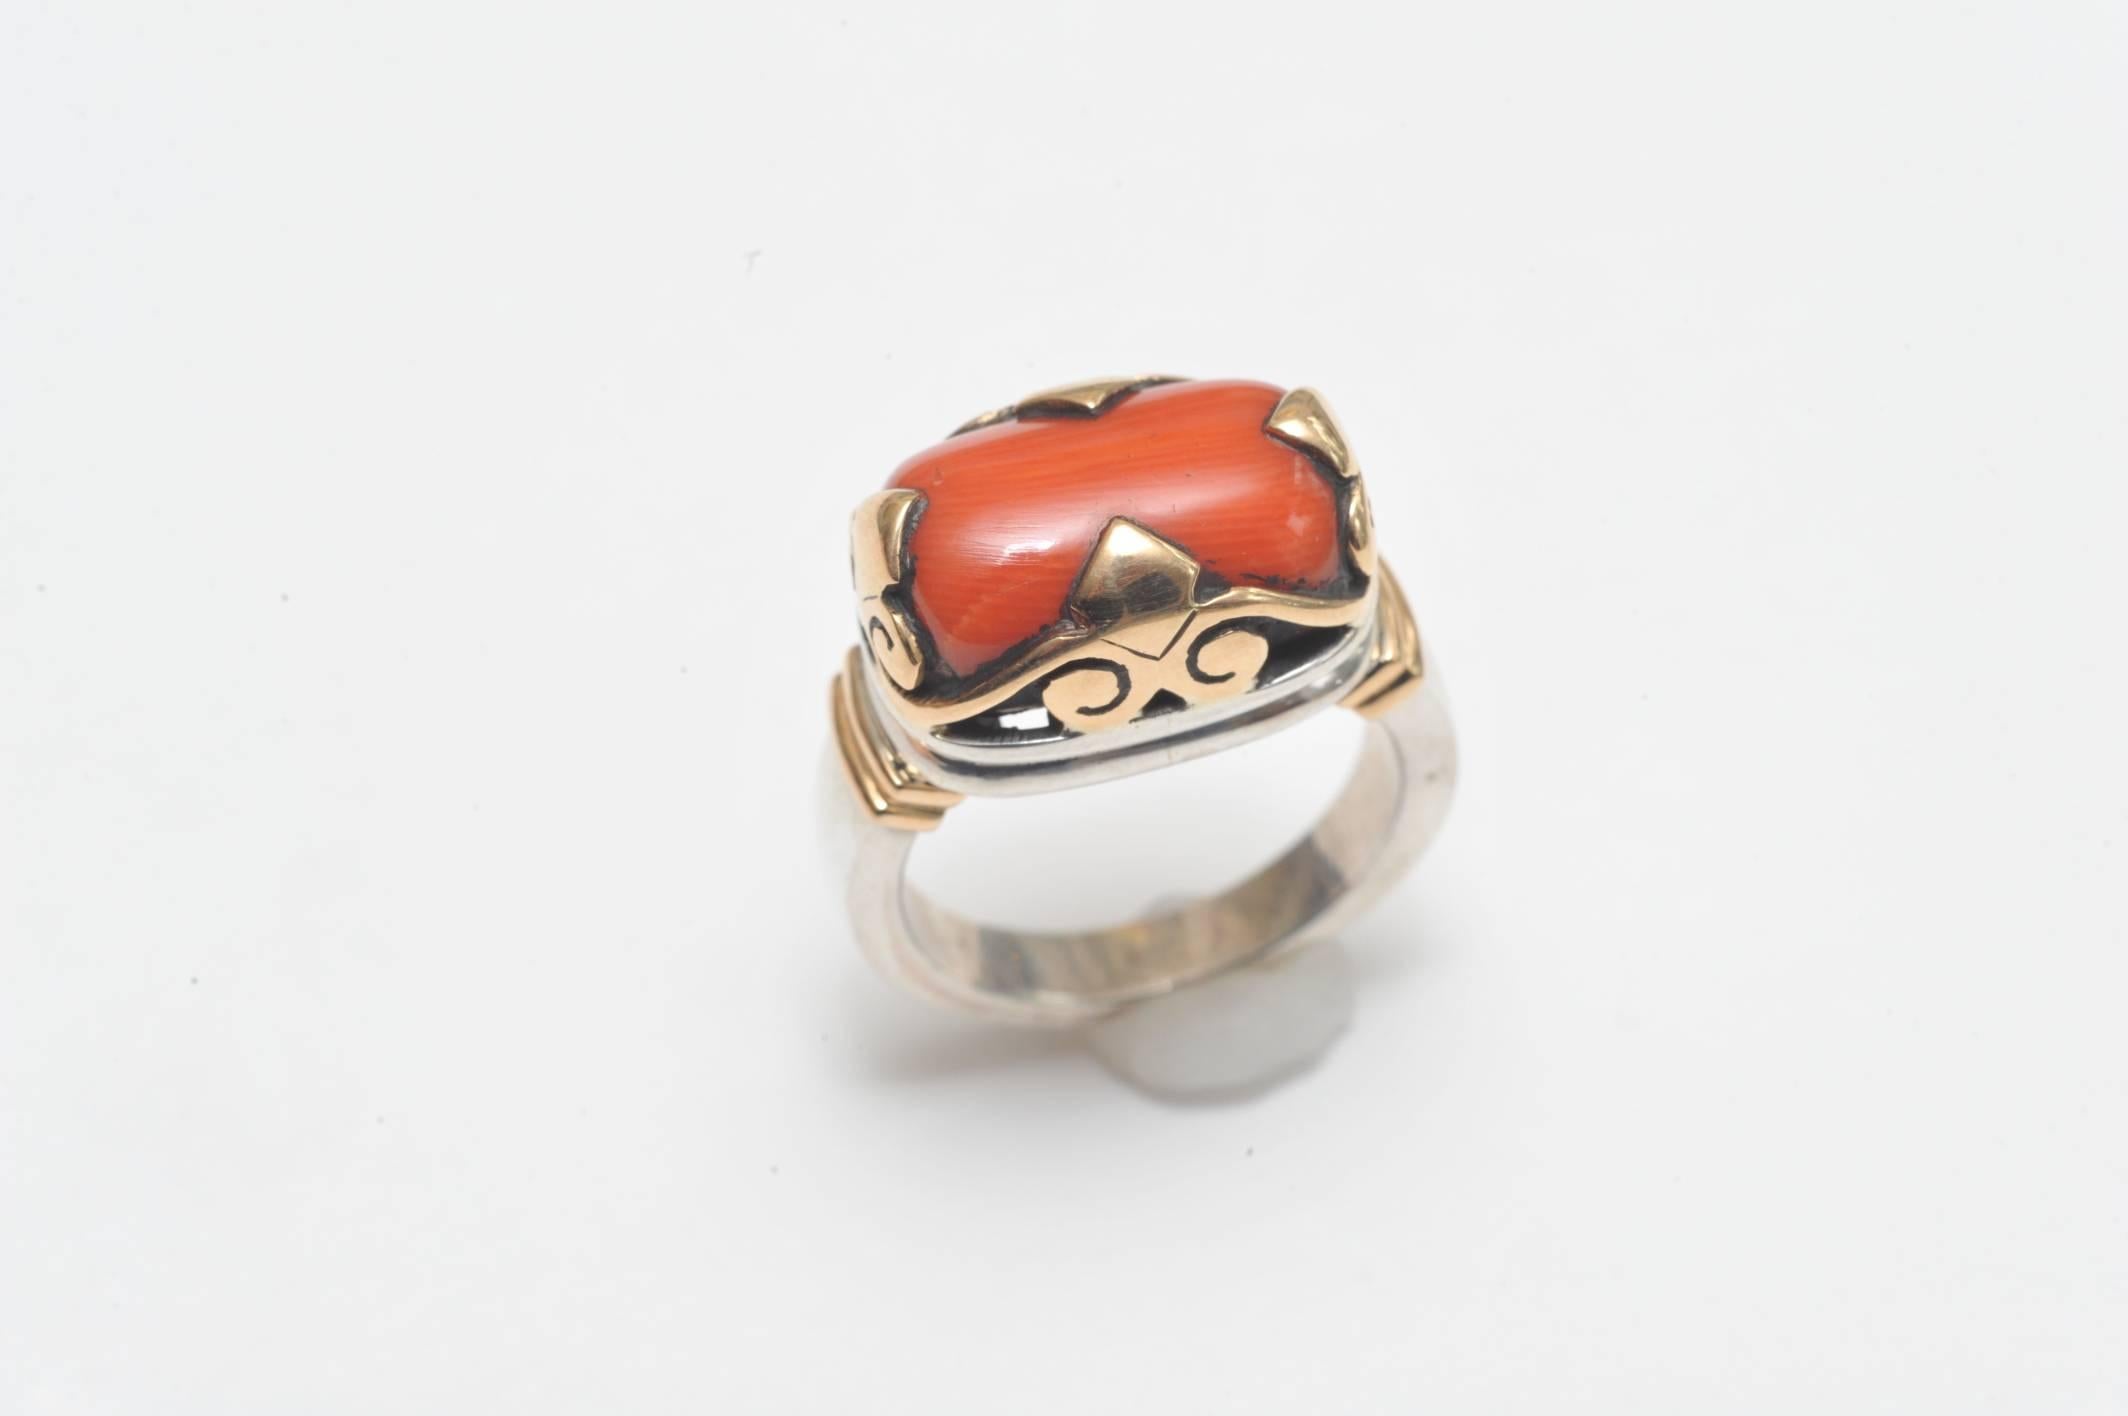 A fabulous combination of sterling silver and 18K gold--a weighted 18K, not plated.  Set with large Italian coral stone with great color in an unusual crown setting.  Ring size is 7.